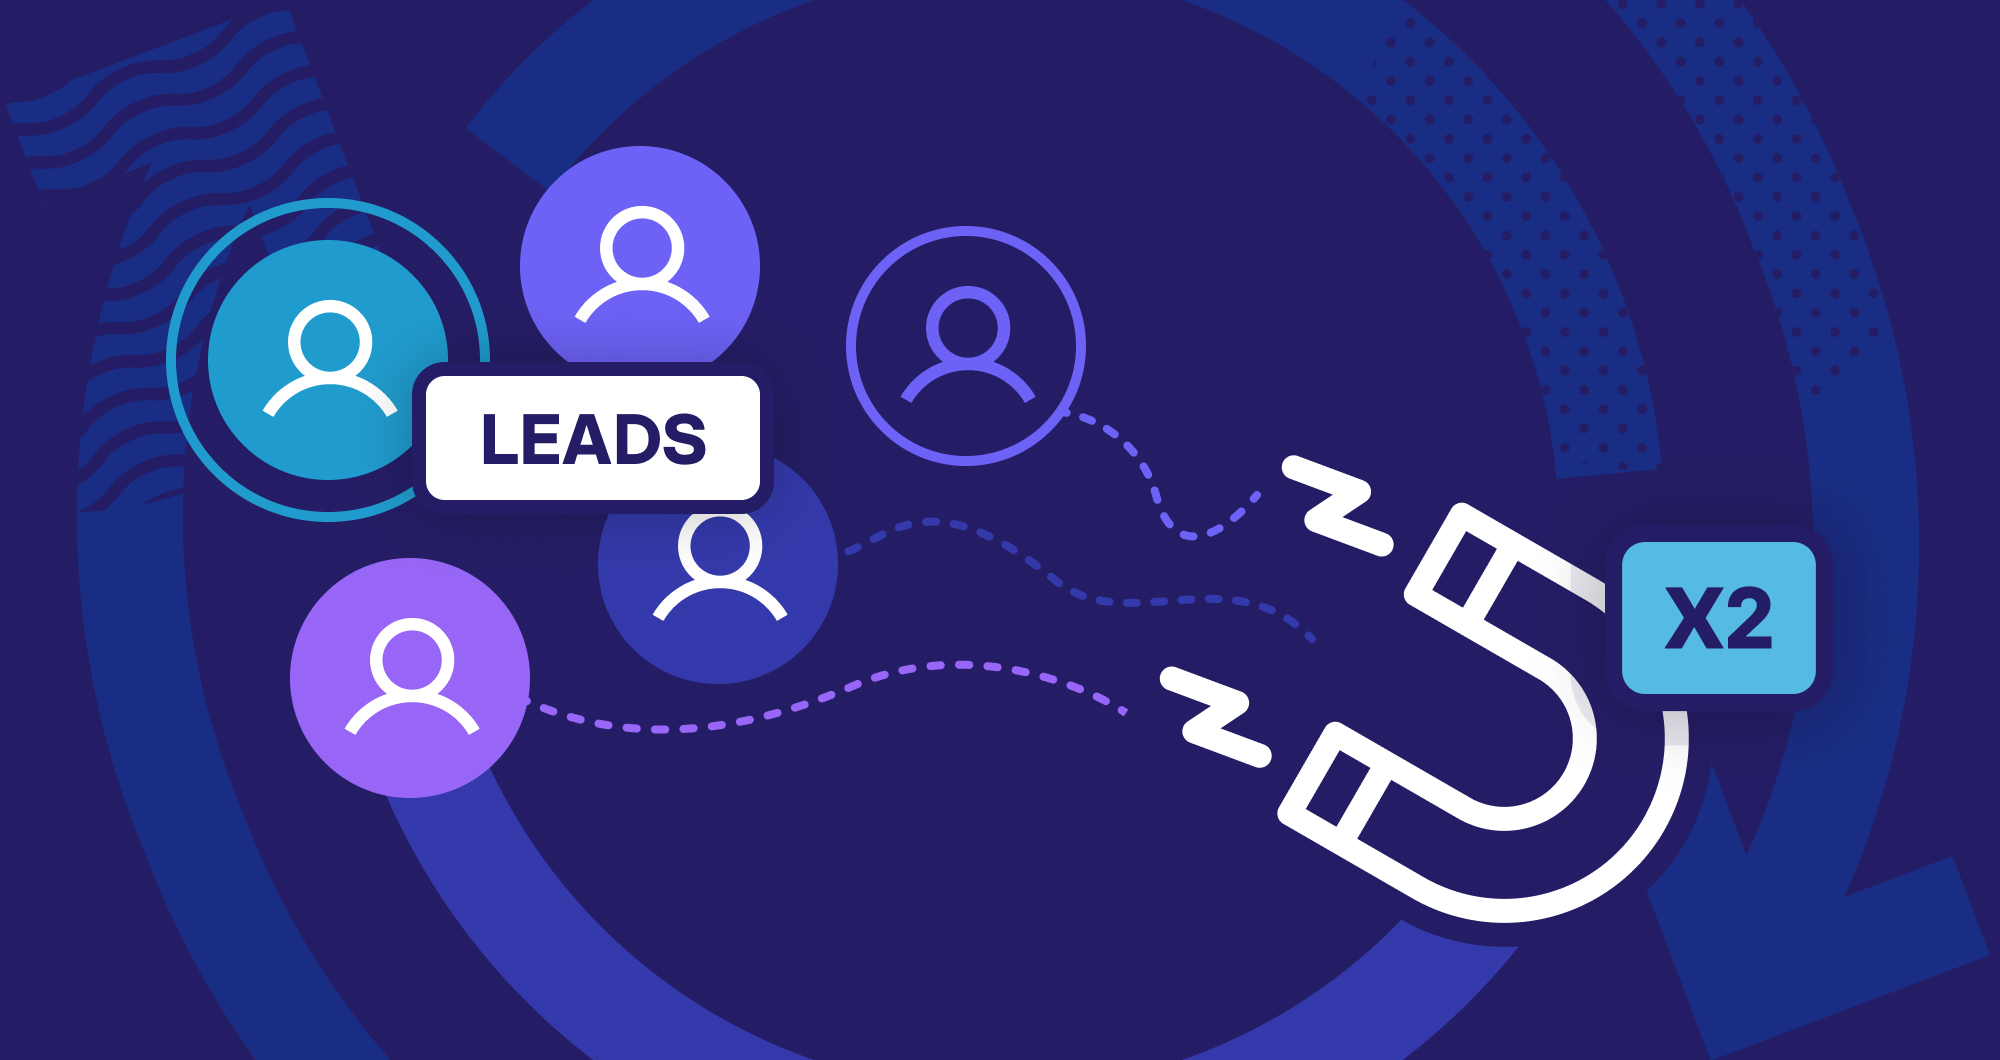 B2B Lead Generation Best Practices Guide 2022